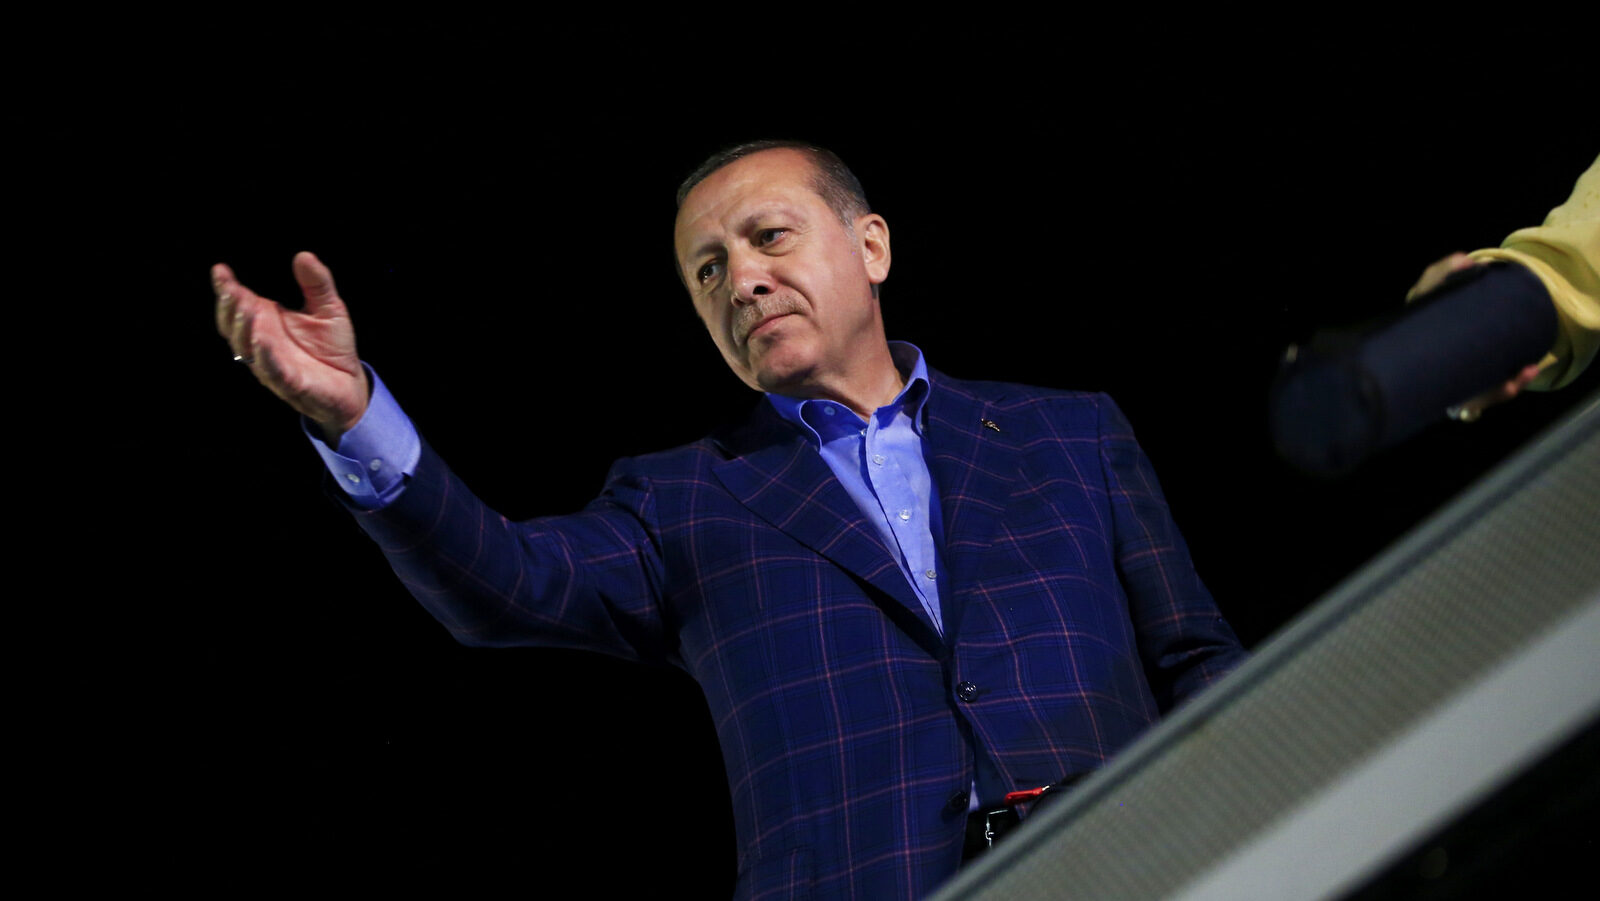 Turkey's President Recep Tayyip Erdogan, waves to supporters in Istanbul, on Sunday, April 16, 2017. Erdogan declared victory in Sunday's historic referendum that will grant sweeping powers to the presidency, hailing the result as a "historic decision." (AP/Lefteris Pitarakis)